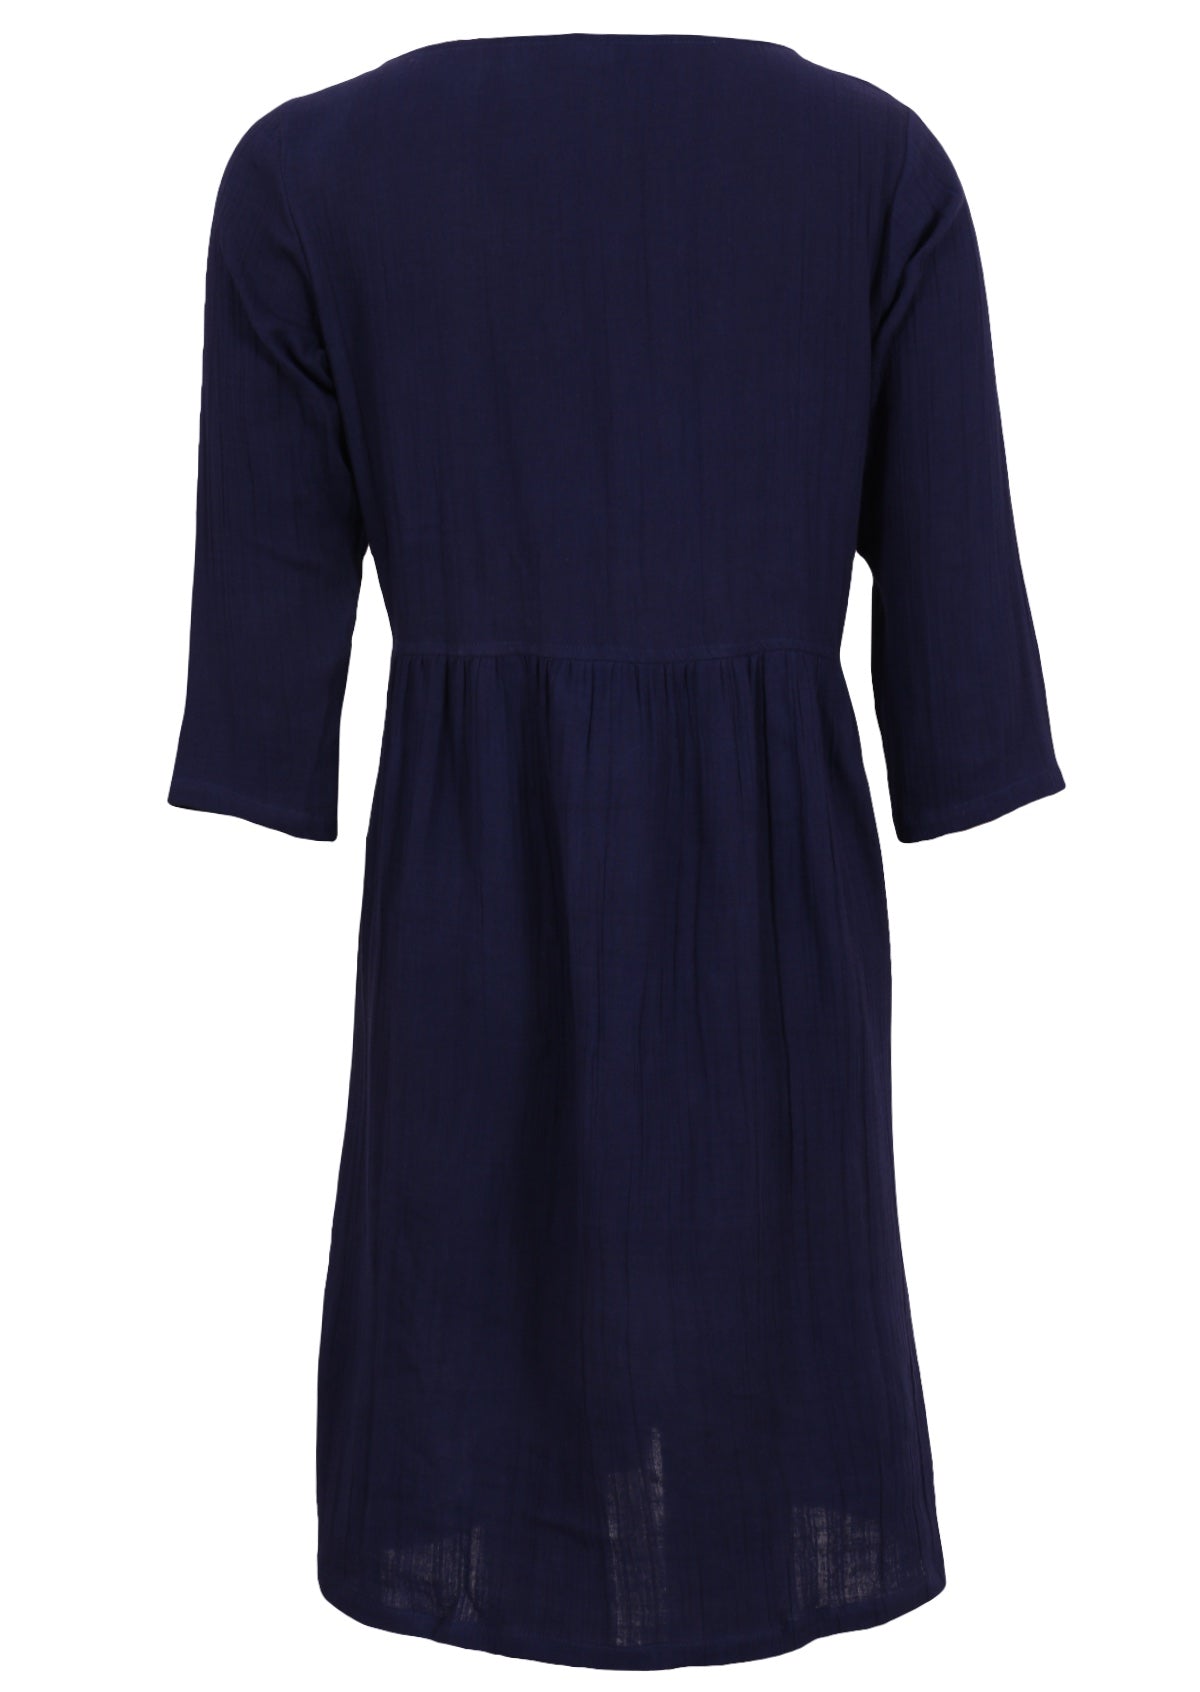 2 layers of lightweight cotton gauze make this super comfortable dress 